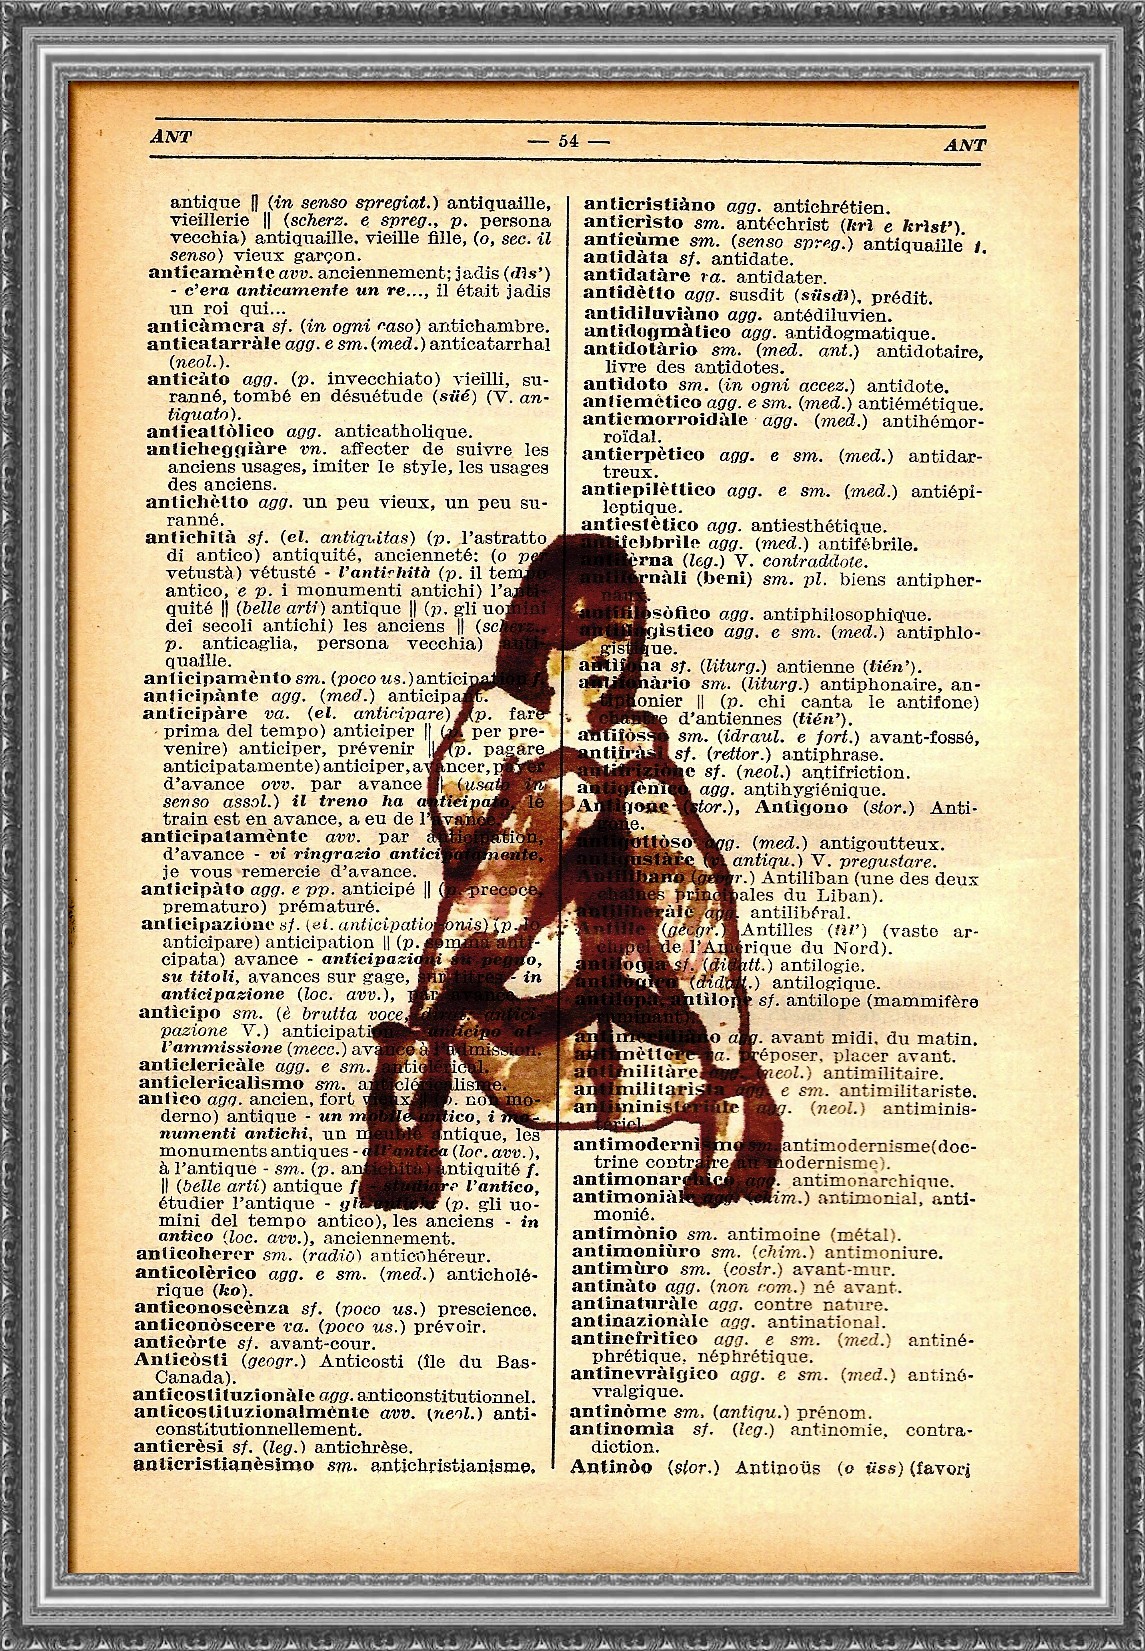 Print Of A Painting Of Mine On Italian-french Dictionary Of 1939